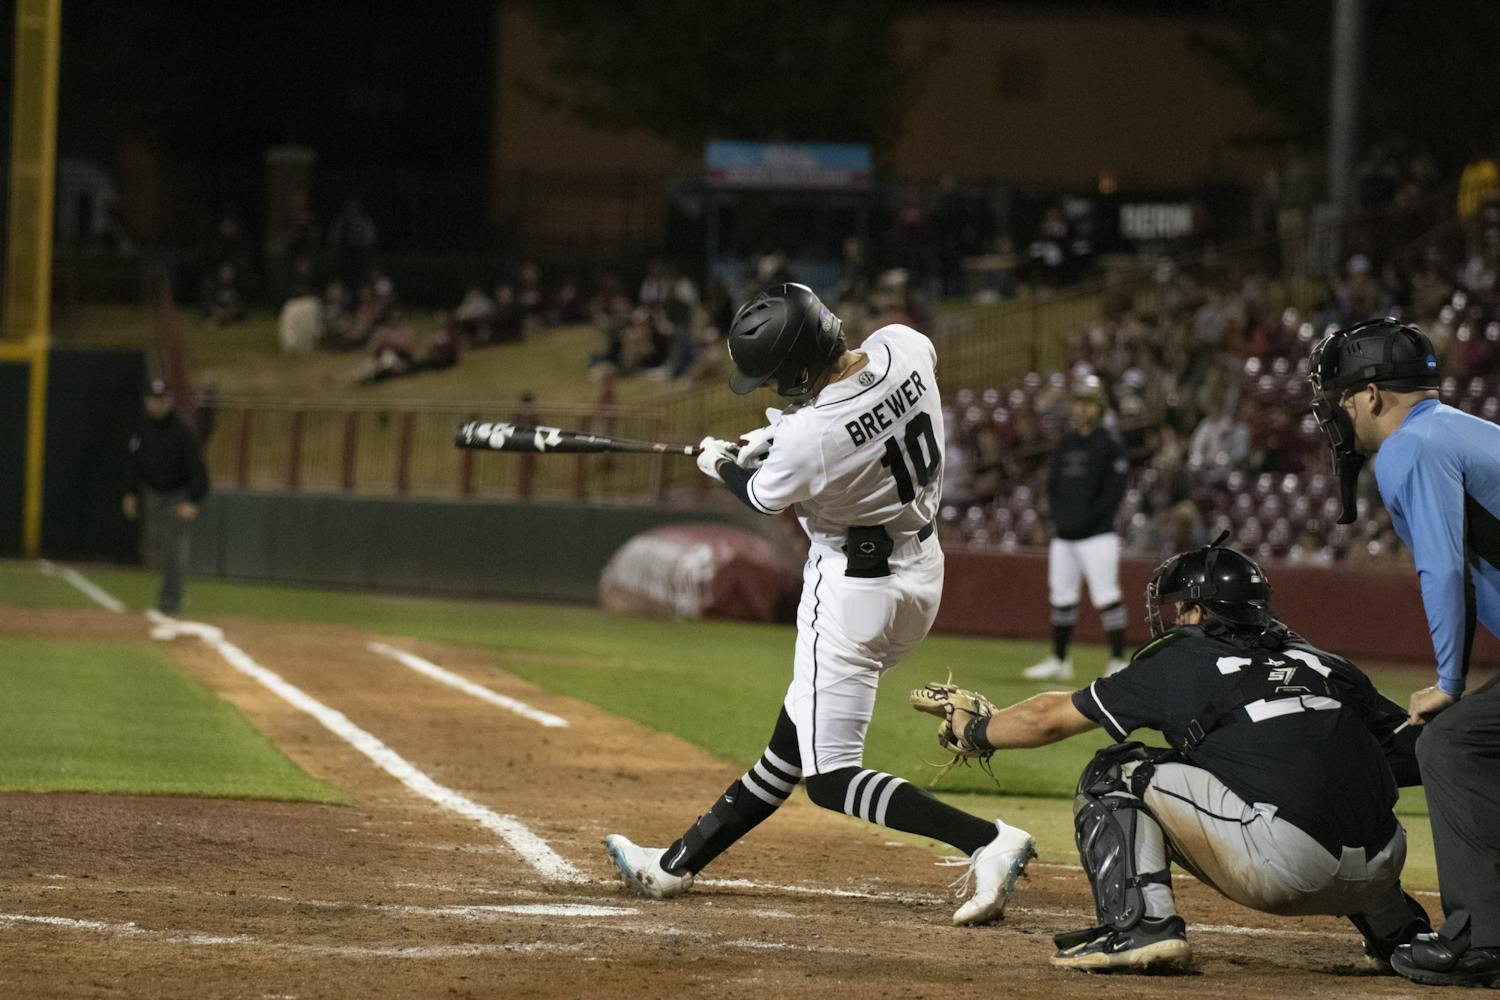 Senior outfielder Dylan Brewer battles at the plate to get on base and extend the South Carolina lead over USC Upstate. With home runs from Brewer and freshman outfielder Ethan Petry, the Gamecocks won Tuesday night’s game against the Spartans 7-2.